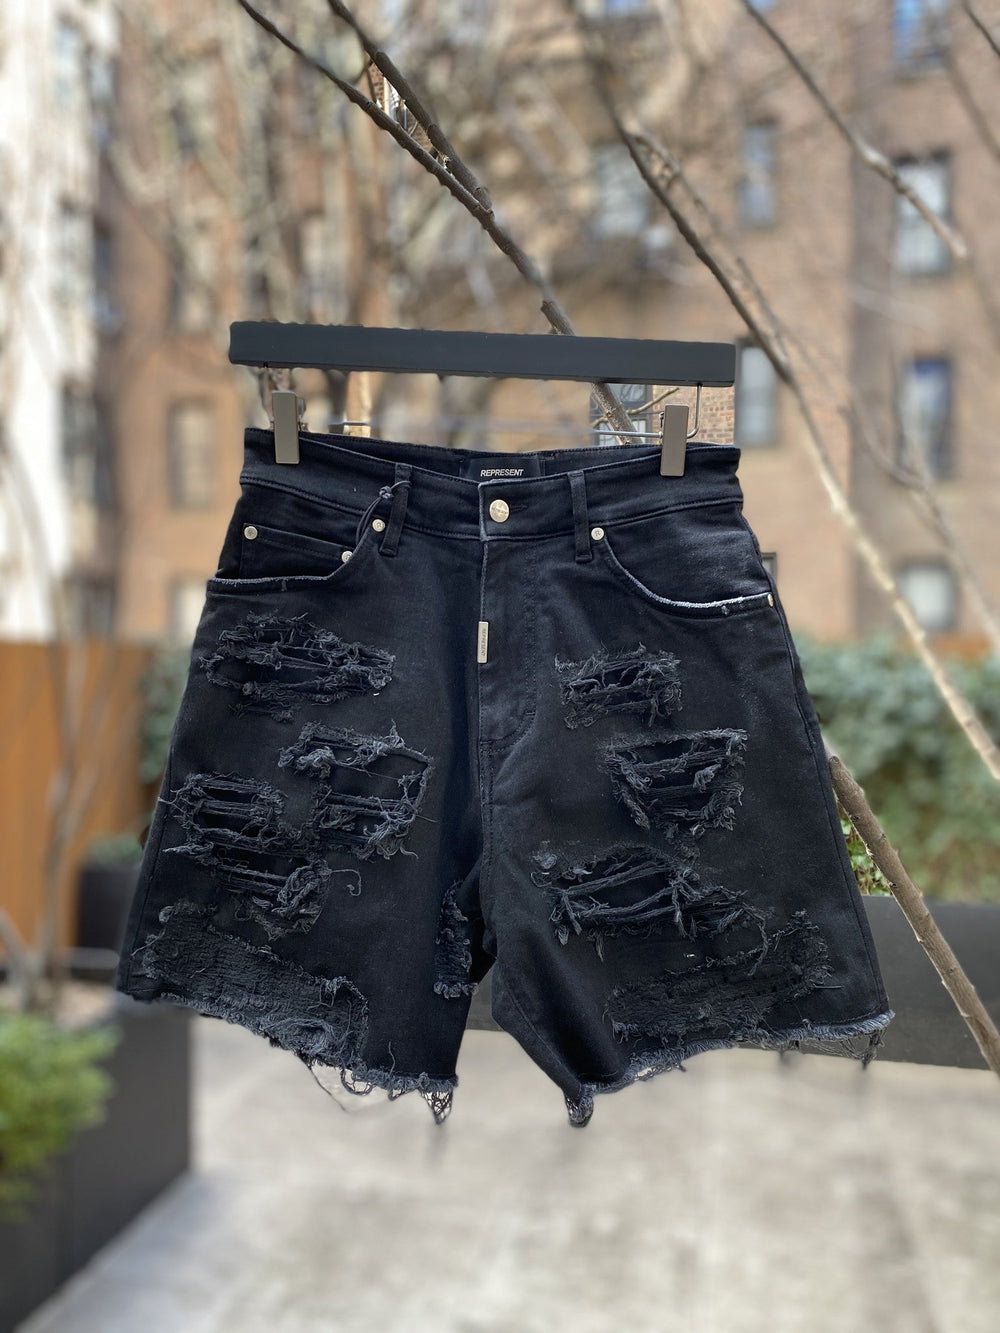 A pair of REPRESENT M07062 SHREDDED DENIM SHORTS BLACK hanging on a tree.